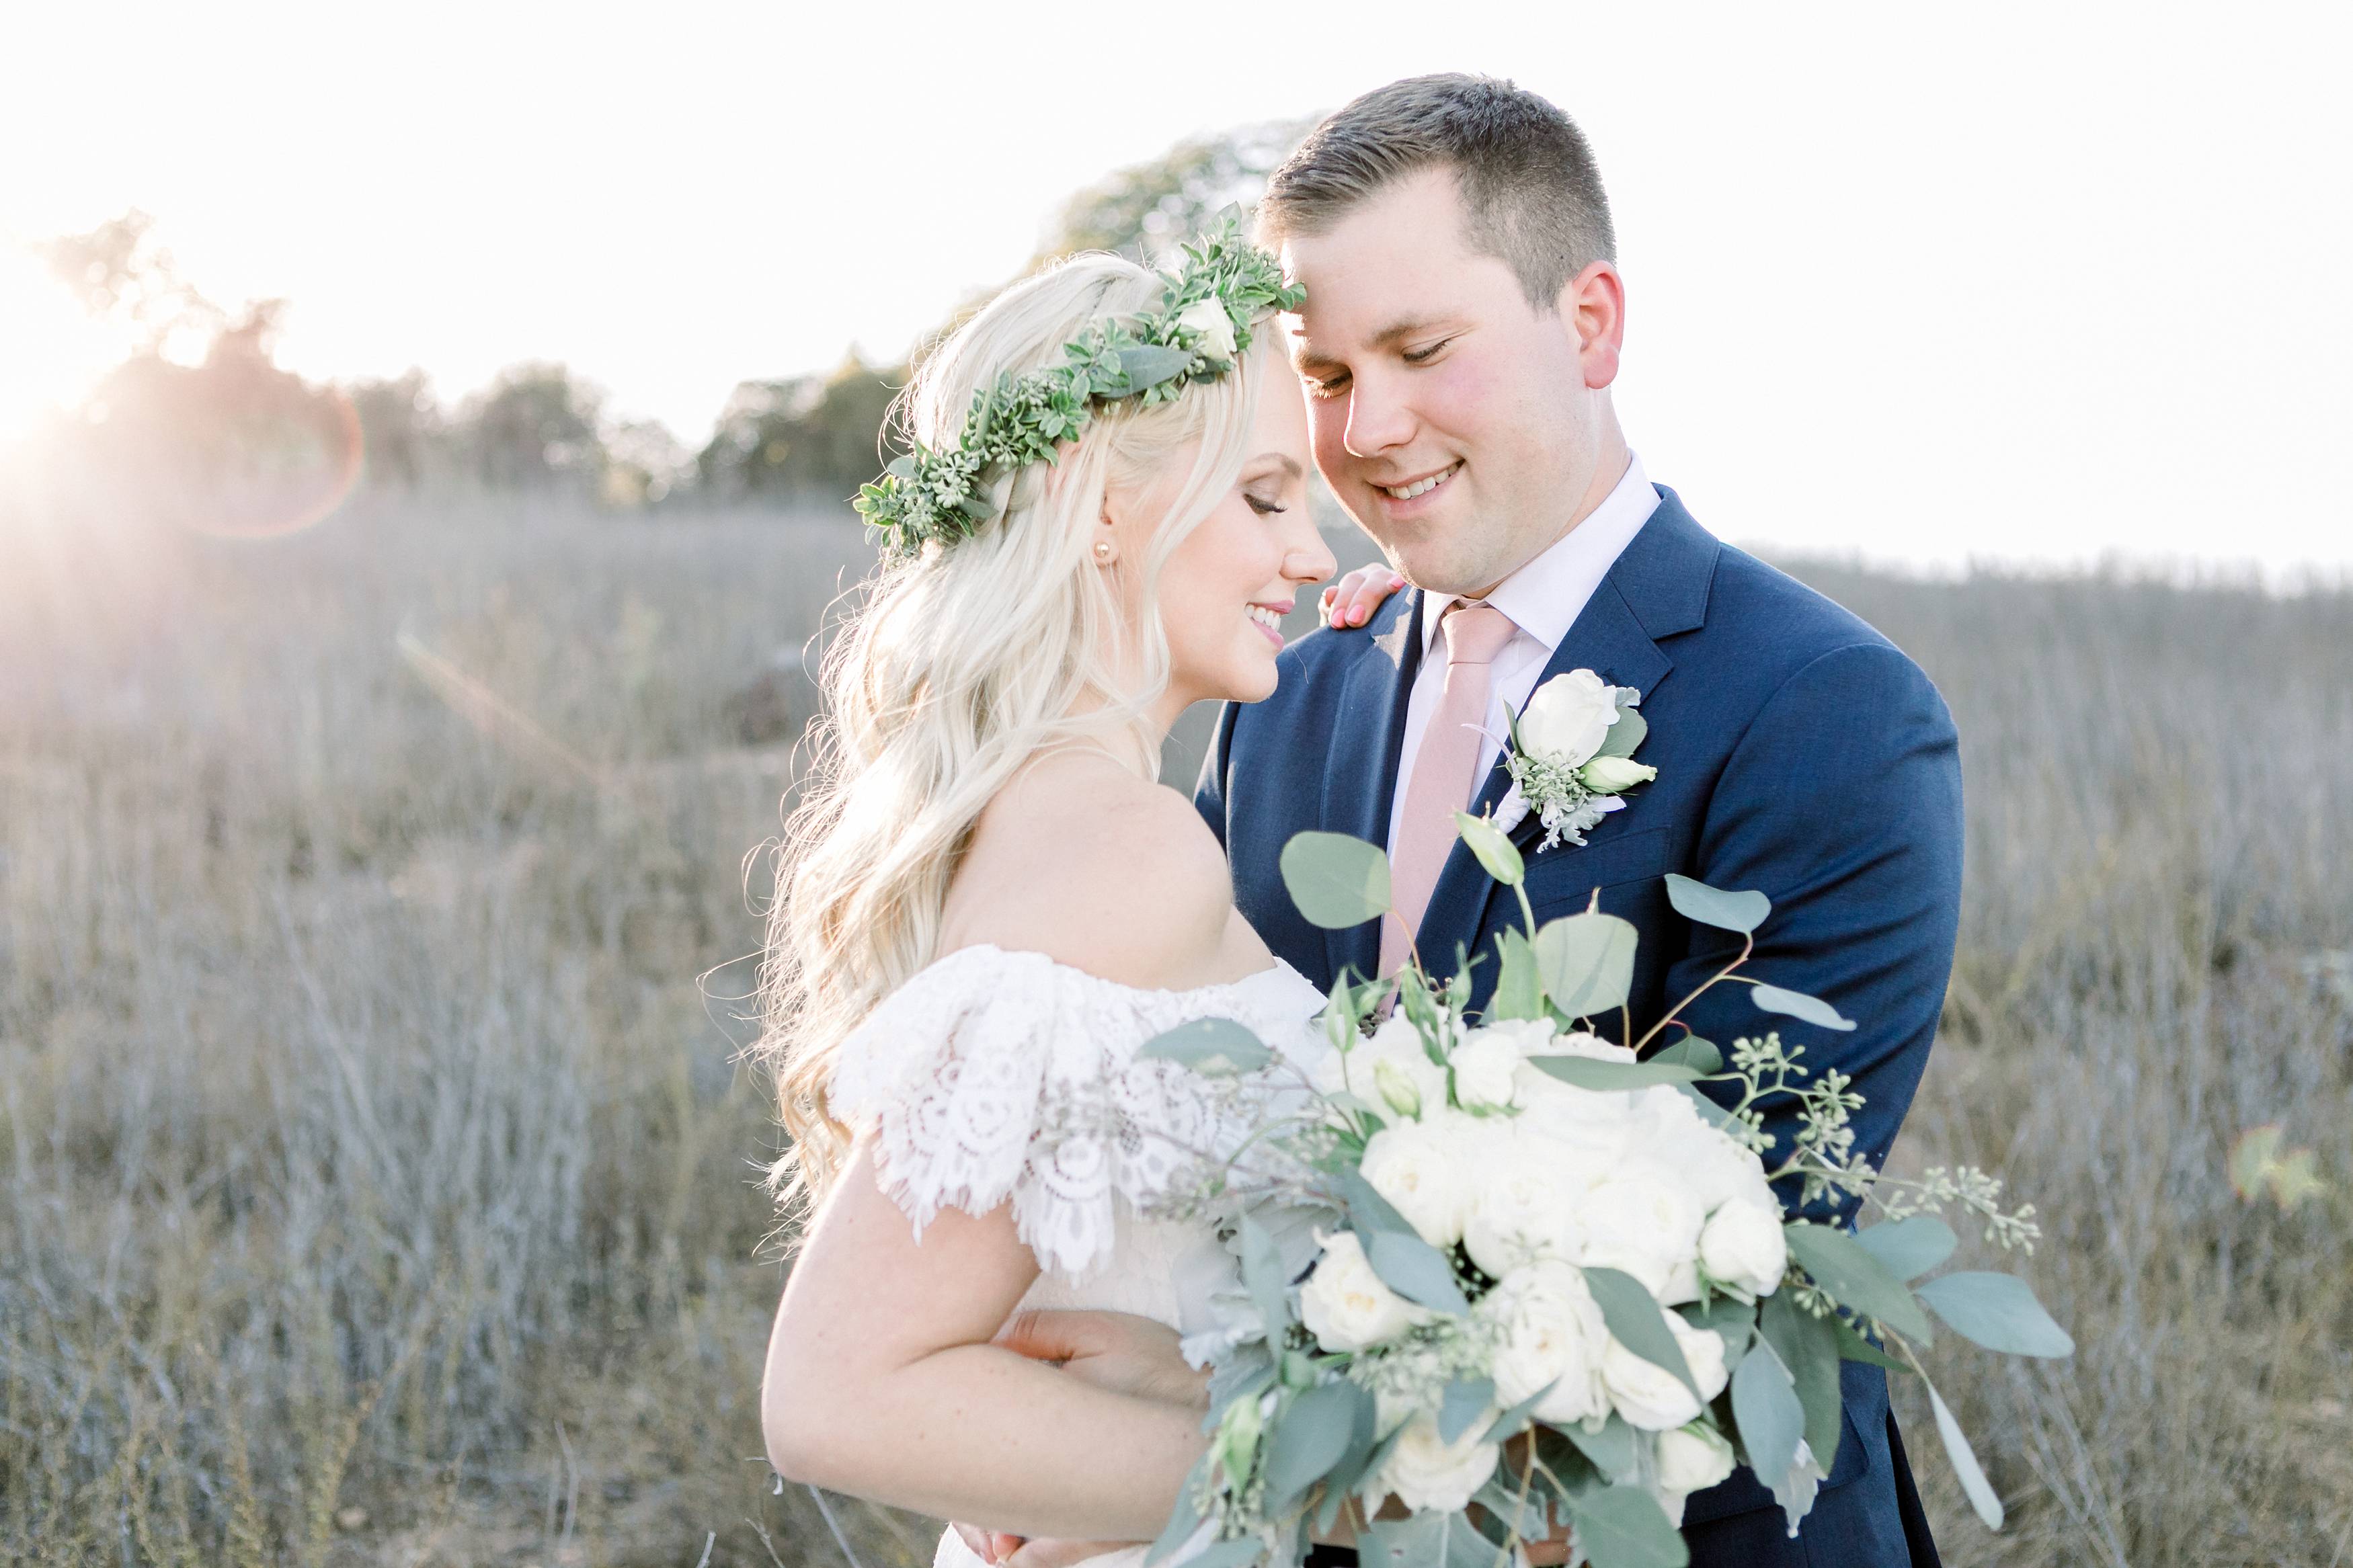 Temecula winery wedding at forever and always farm wedding venue in Temecula California by temecula photographer carrie mcguire photography